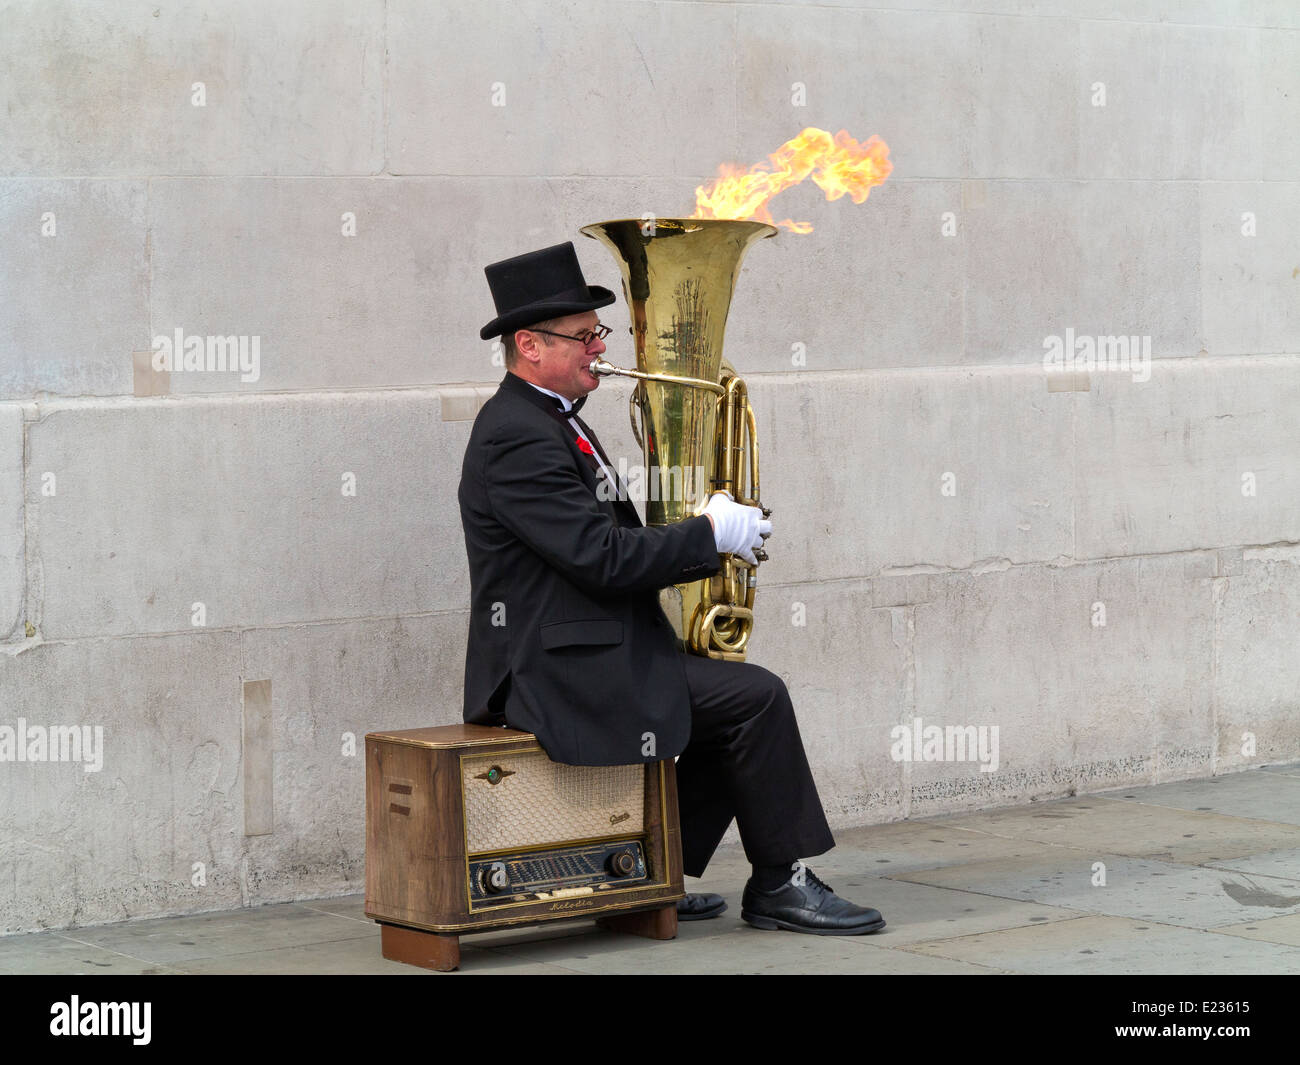 Busker, Christopher Werkowicz playing his flaming tuba sitting on an old radio against a plain stone wall London England Stock Photo